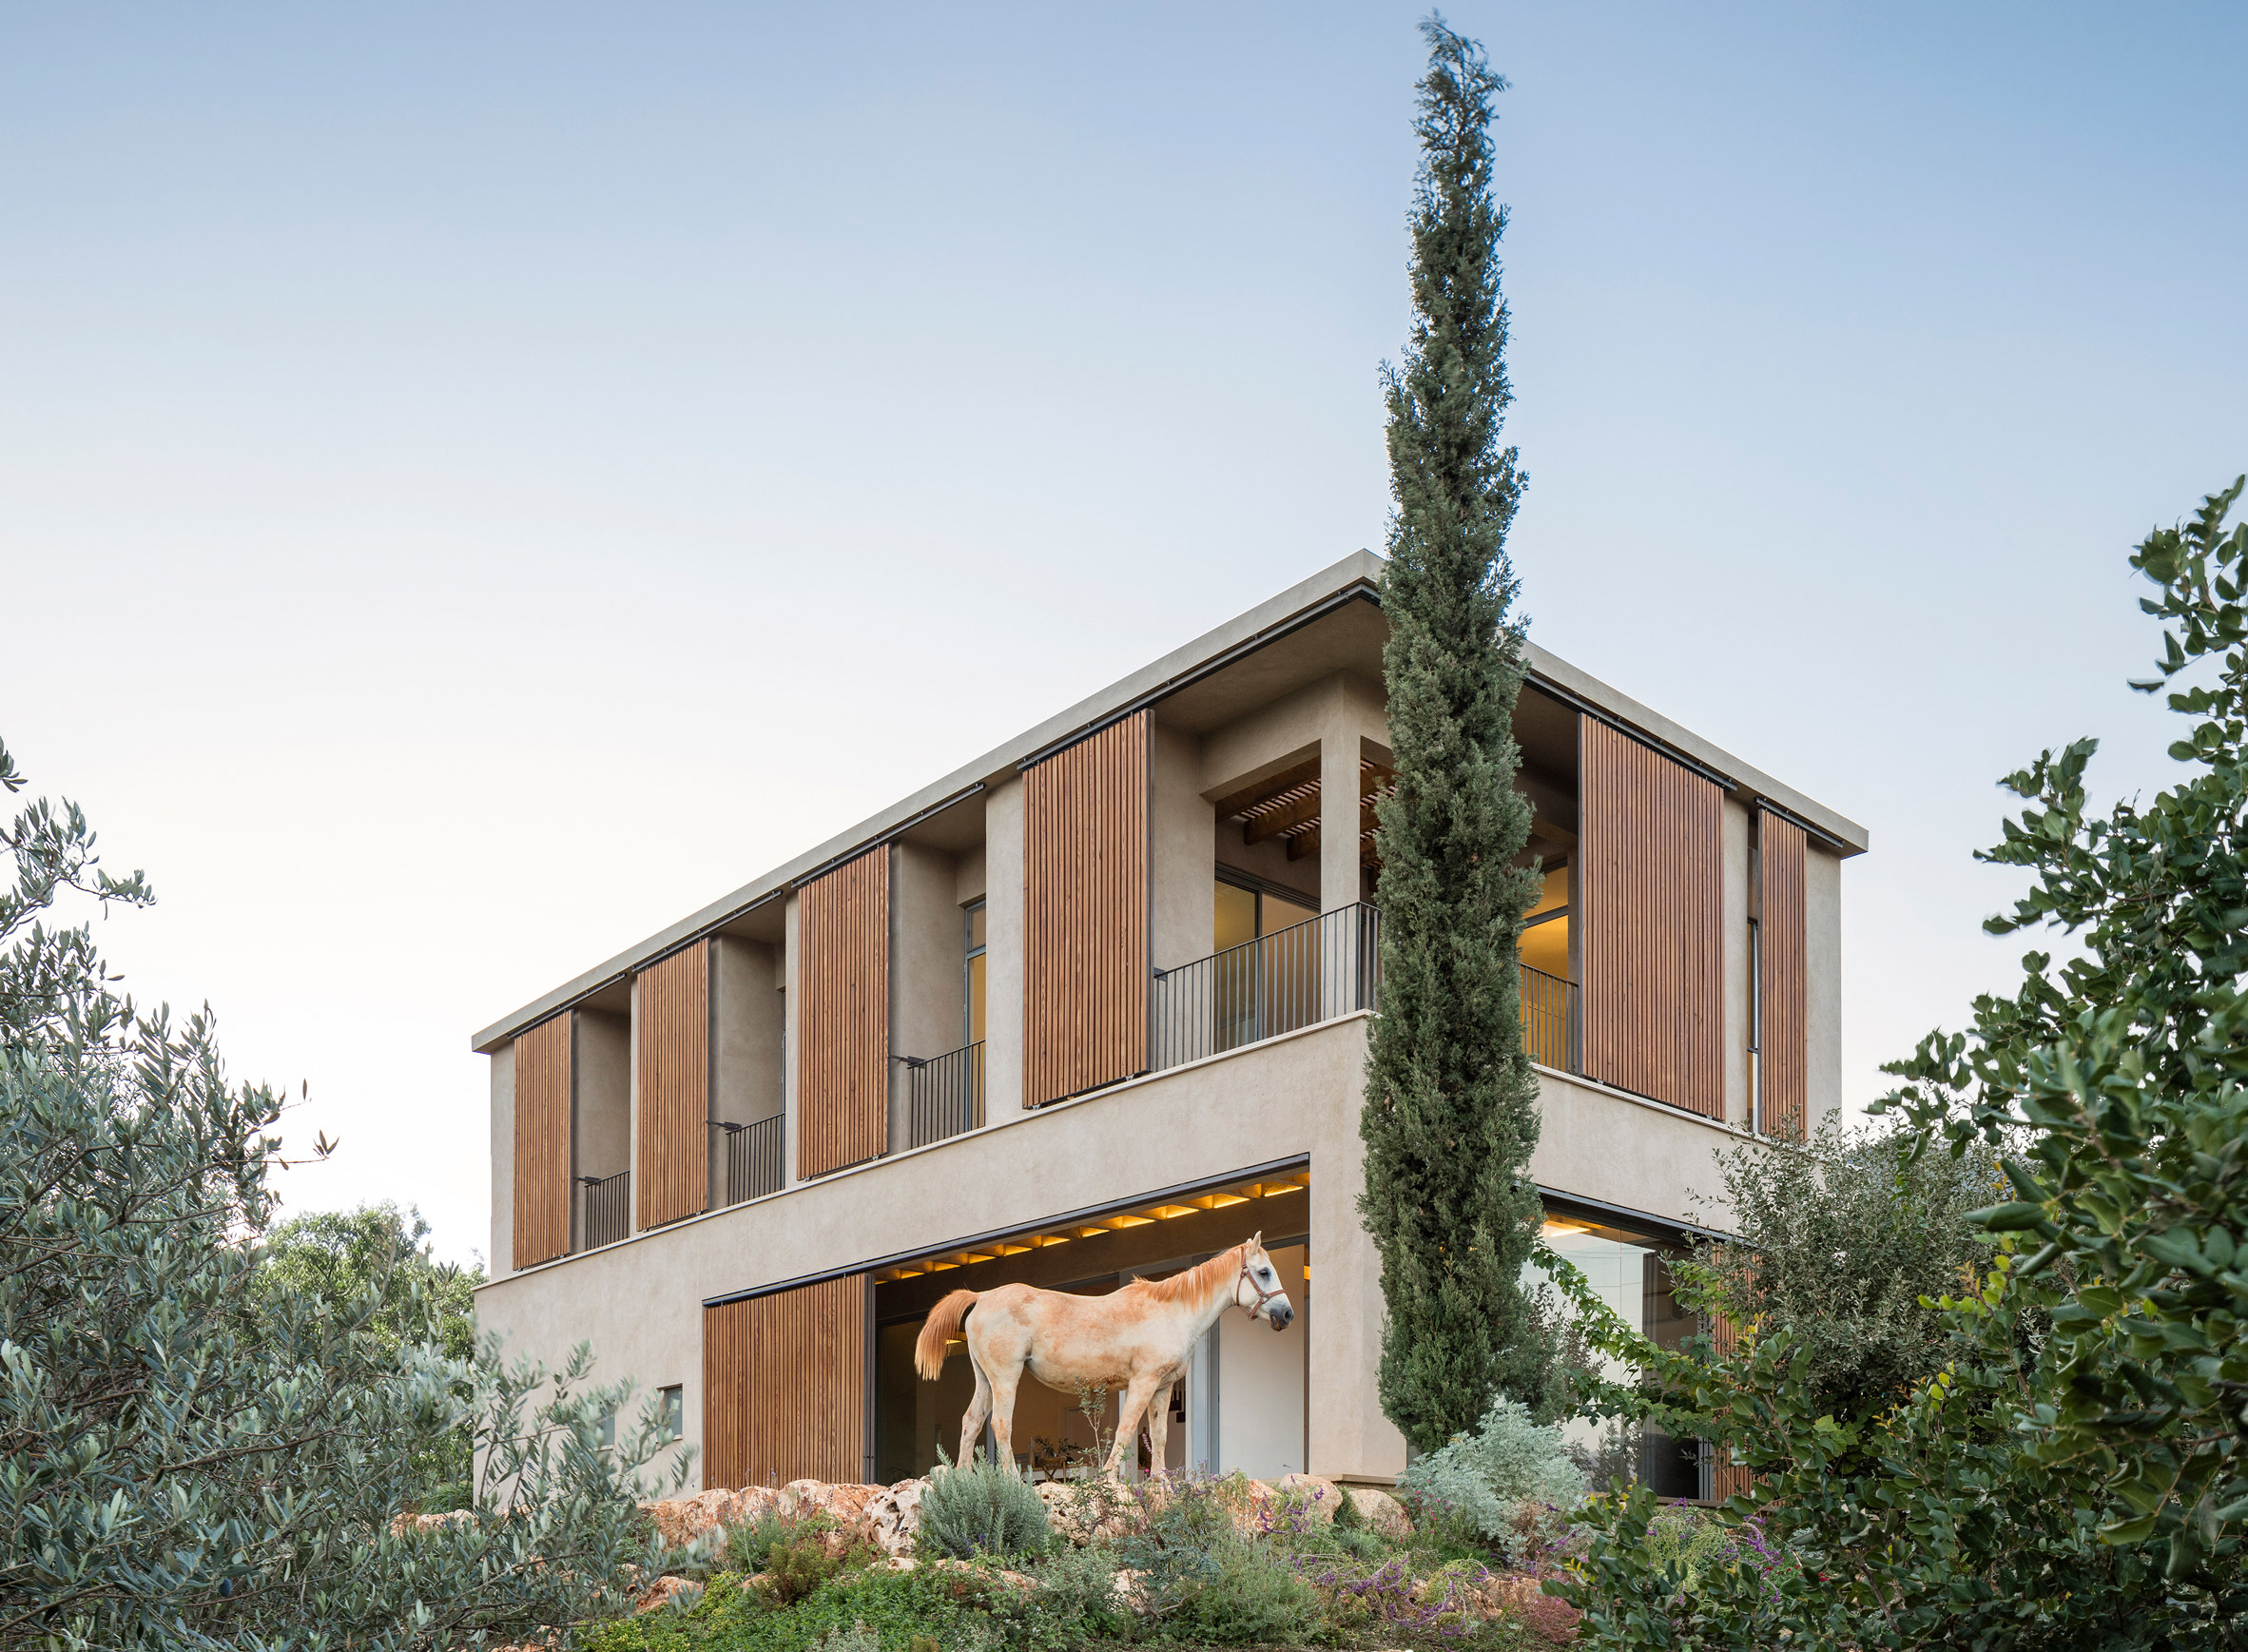 Slatted shades keep house by the Sea of Galilee cool during hot summer days